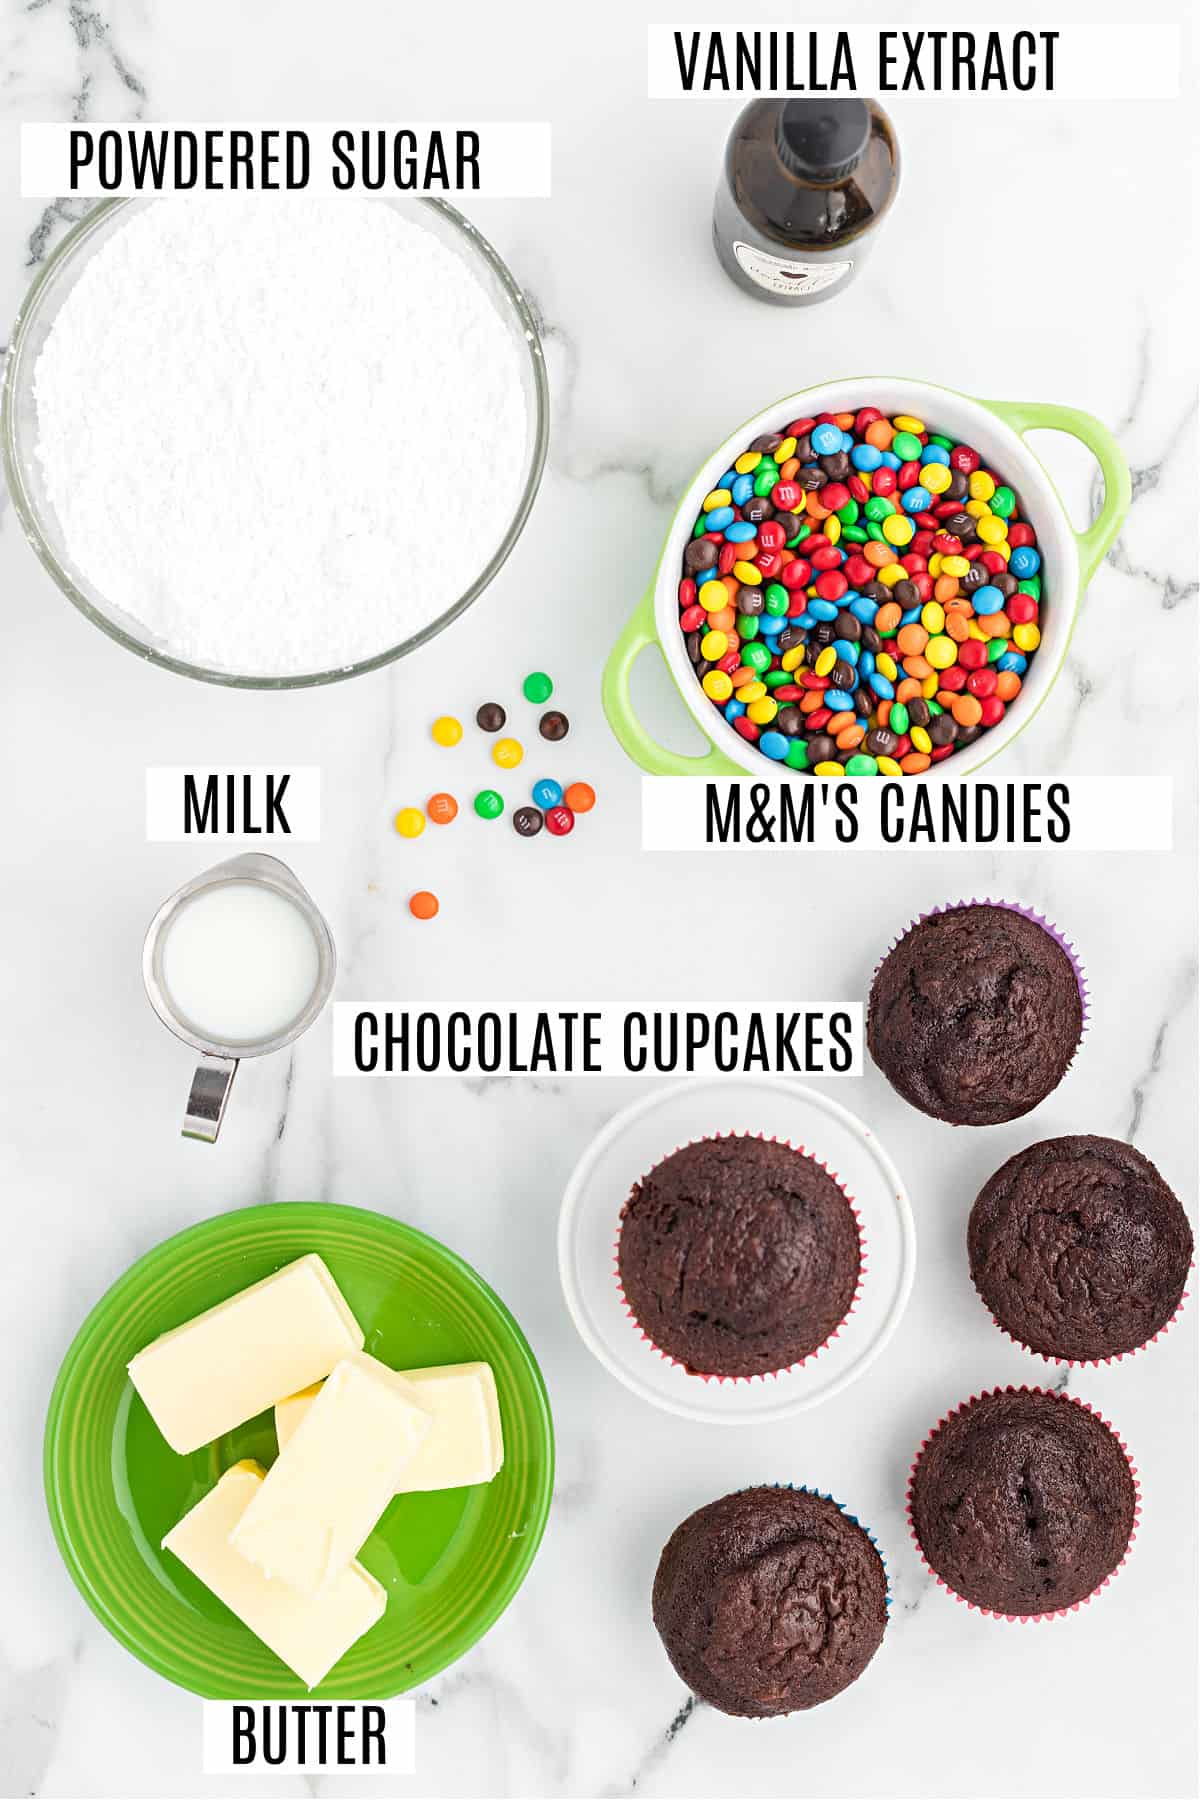 Ingredients for chocolate cupcakes with M&M frosting.